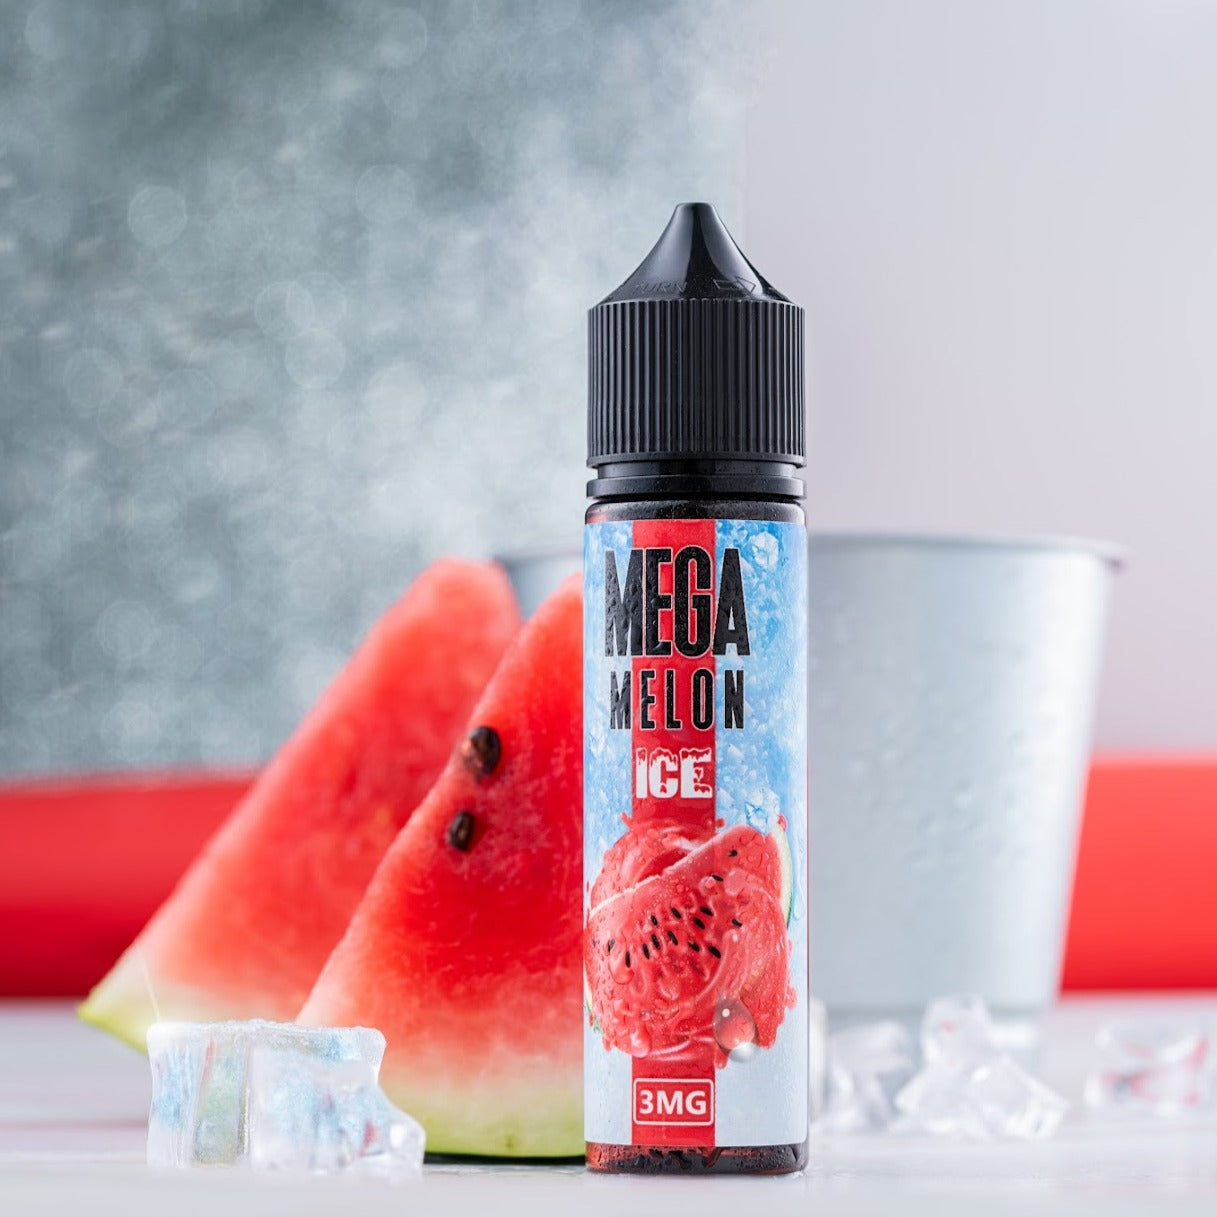 Mega Melon Ice e-liquid by GRAND - A refreshing blend of icy melon sweetness for a revitalizing vaping experience